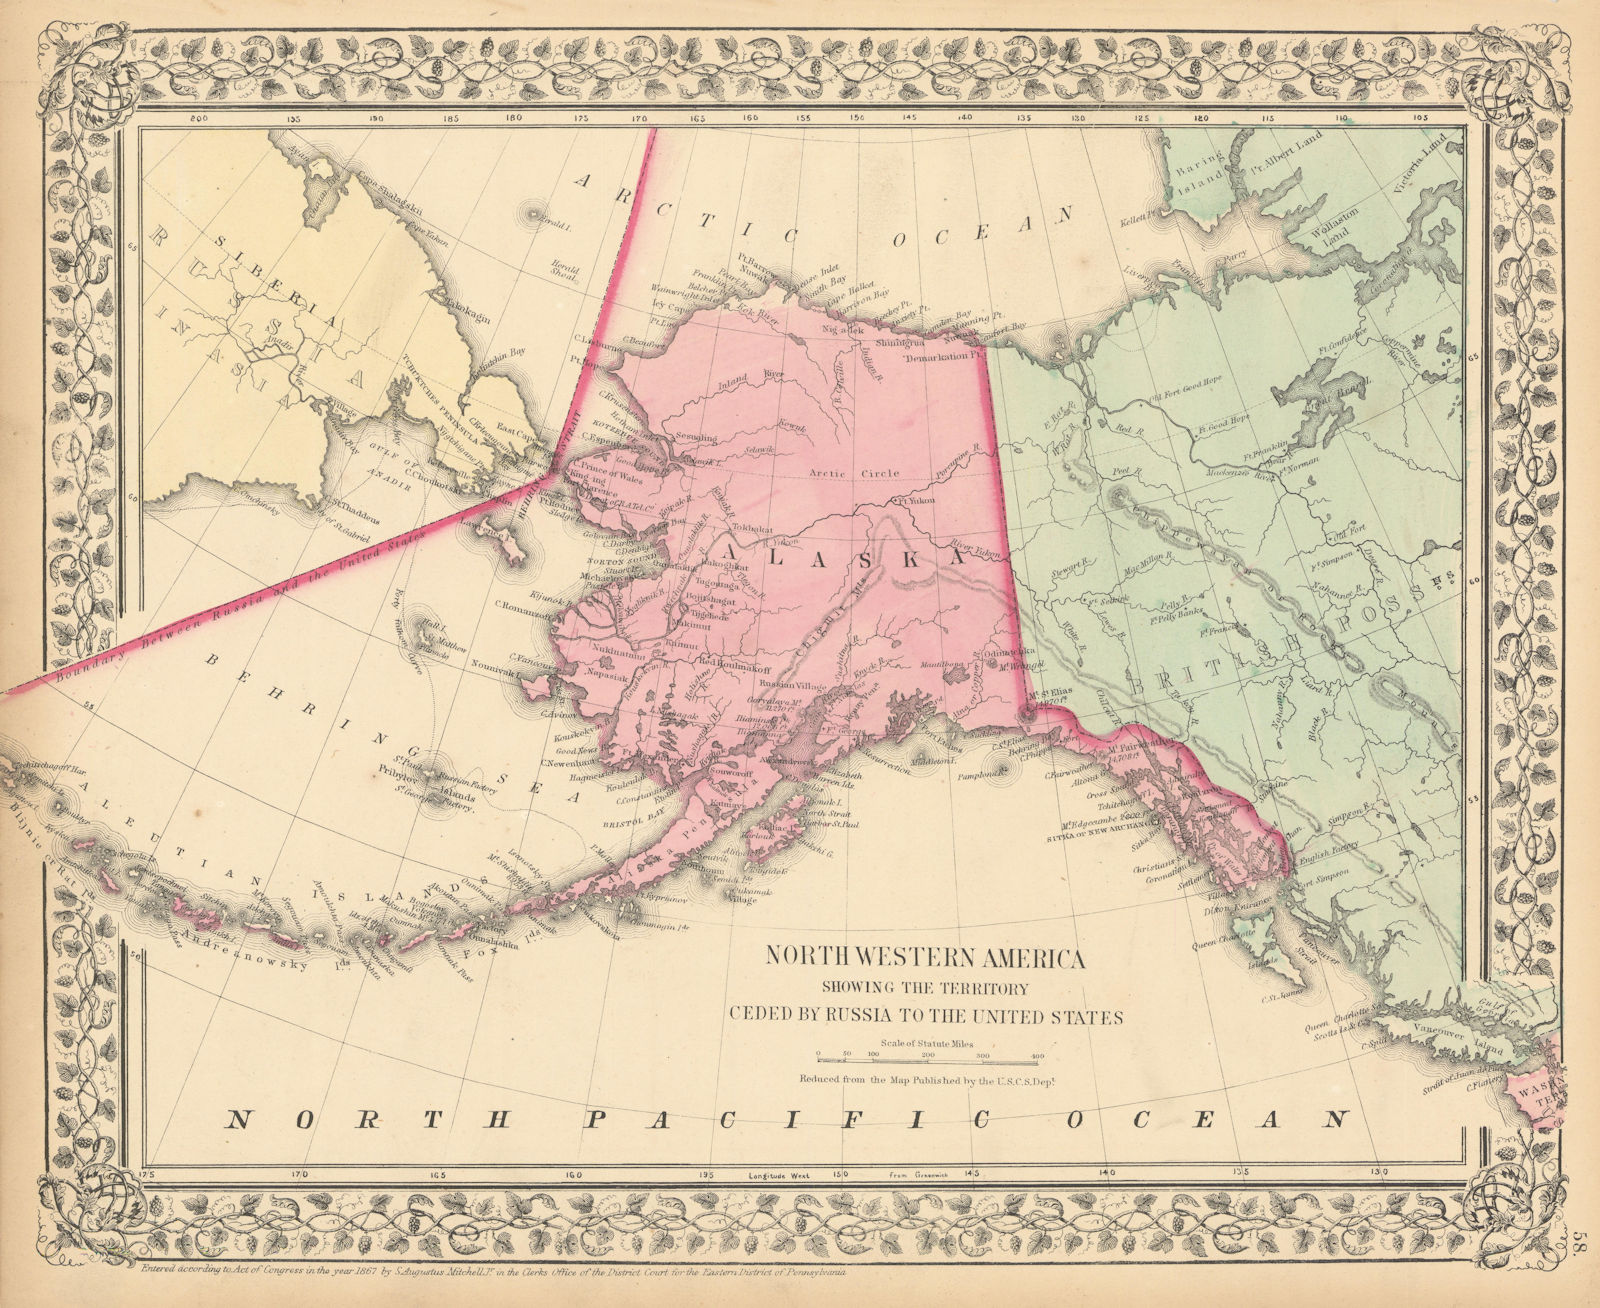 Associate Product Northwestern America showing… Territory ceded by Russia Alaska MITCHELL 1869 map